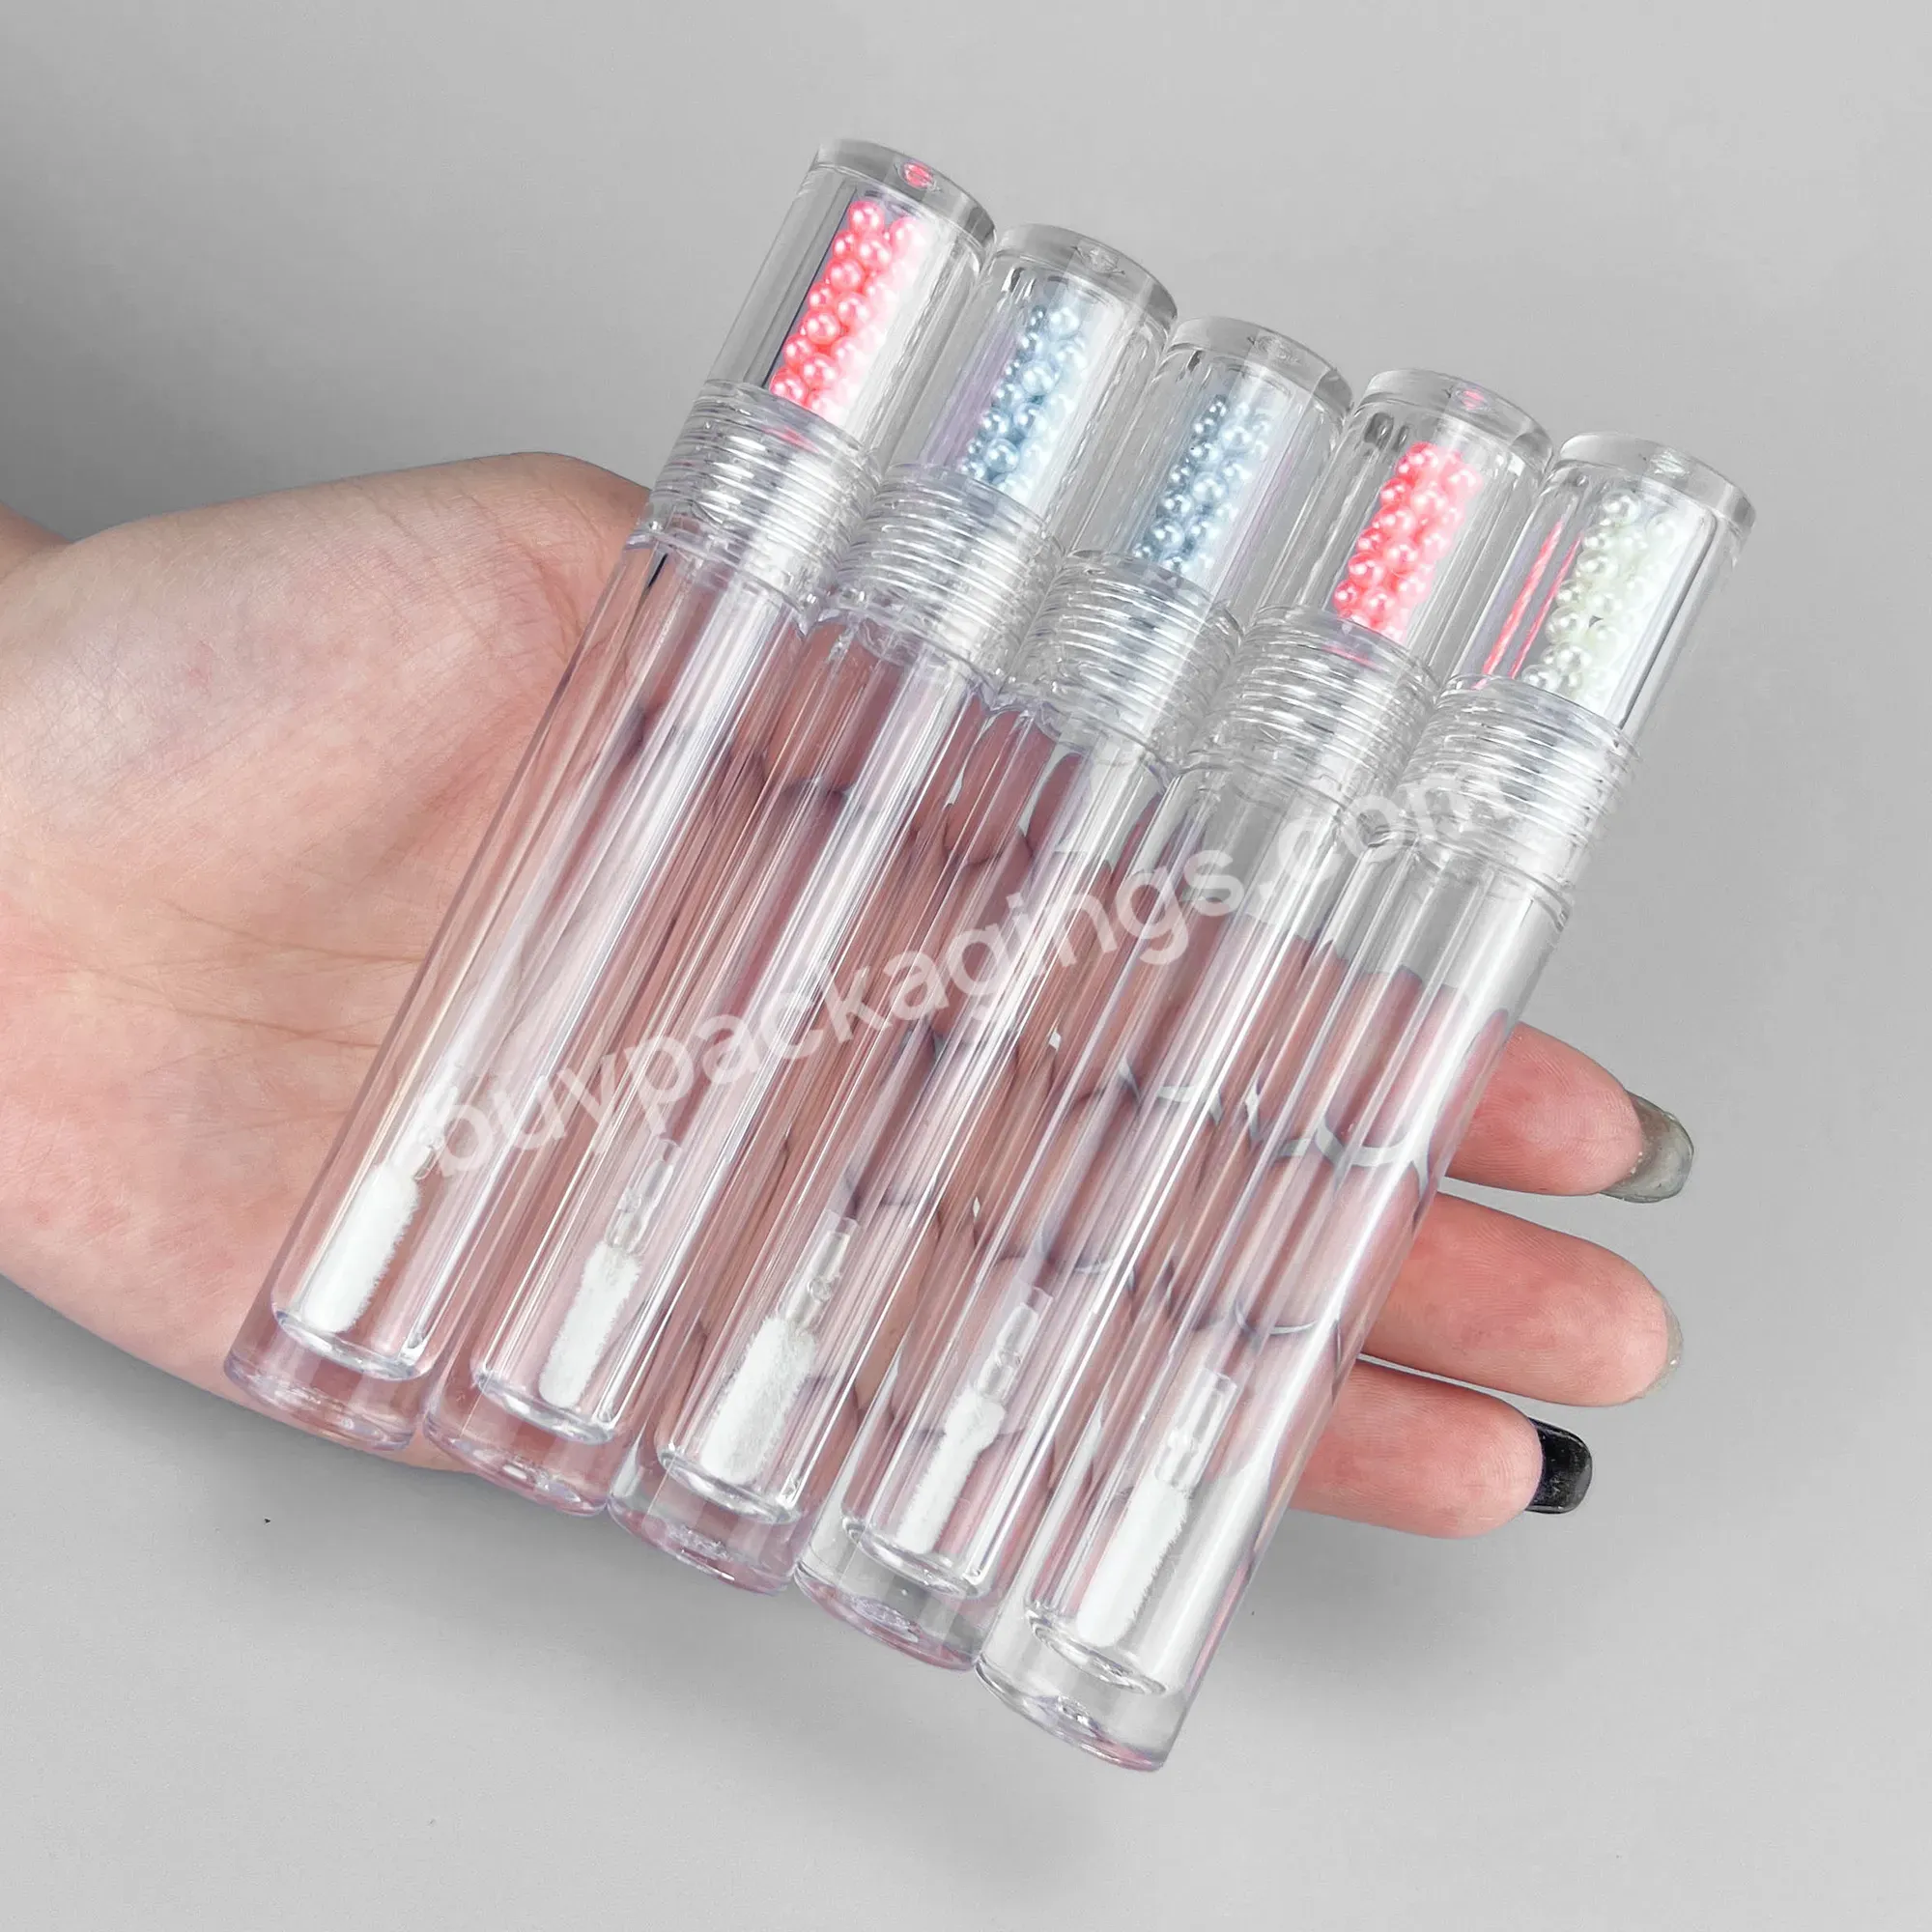 Newest Stock Acrylic Transparent Solid Cover Round Empty Plastic Lip Gloss Tube With Wands Private Label - Buy Natural Lip Gloss Container Tube,Transparentl Lip Gloss Tube,Clear Lip Gloss Packaging.